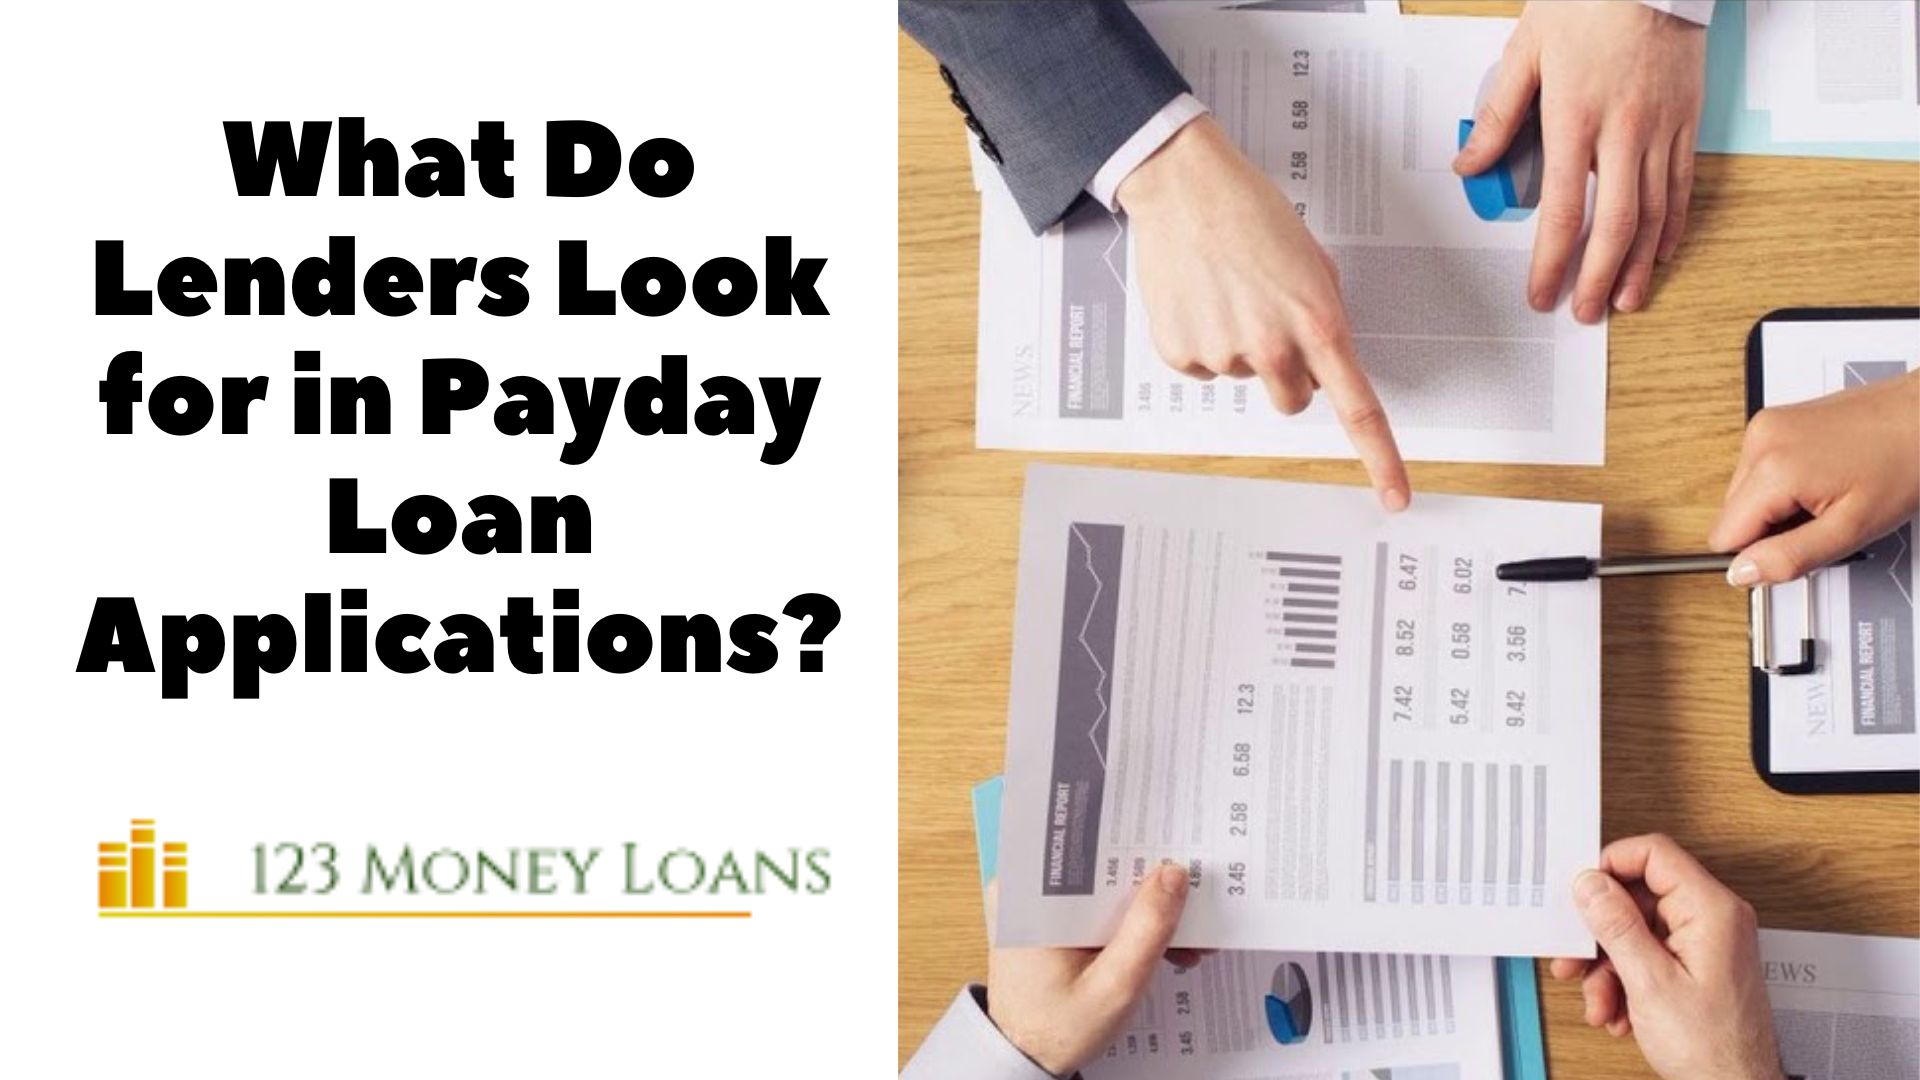 What Do Lenders Look for in Payday Loan Applications?